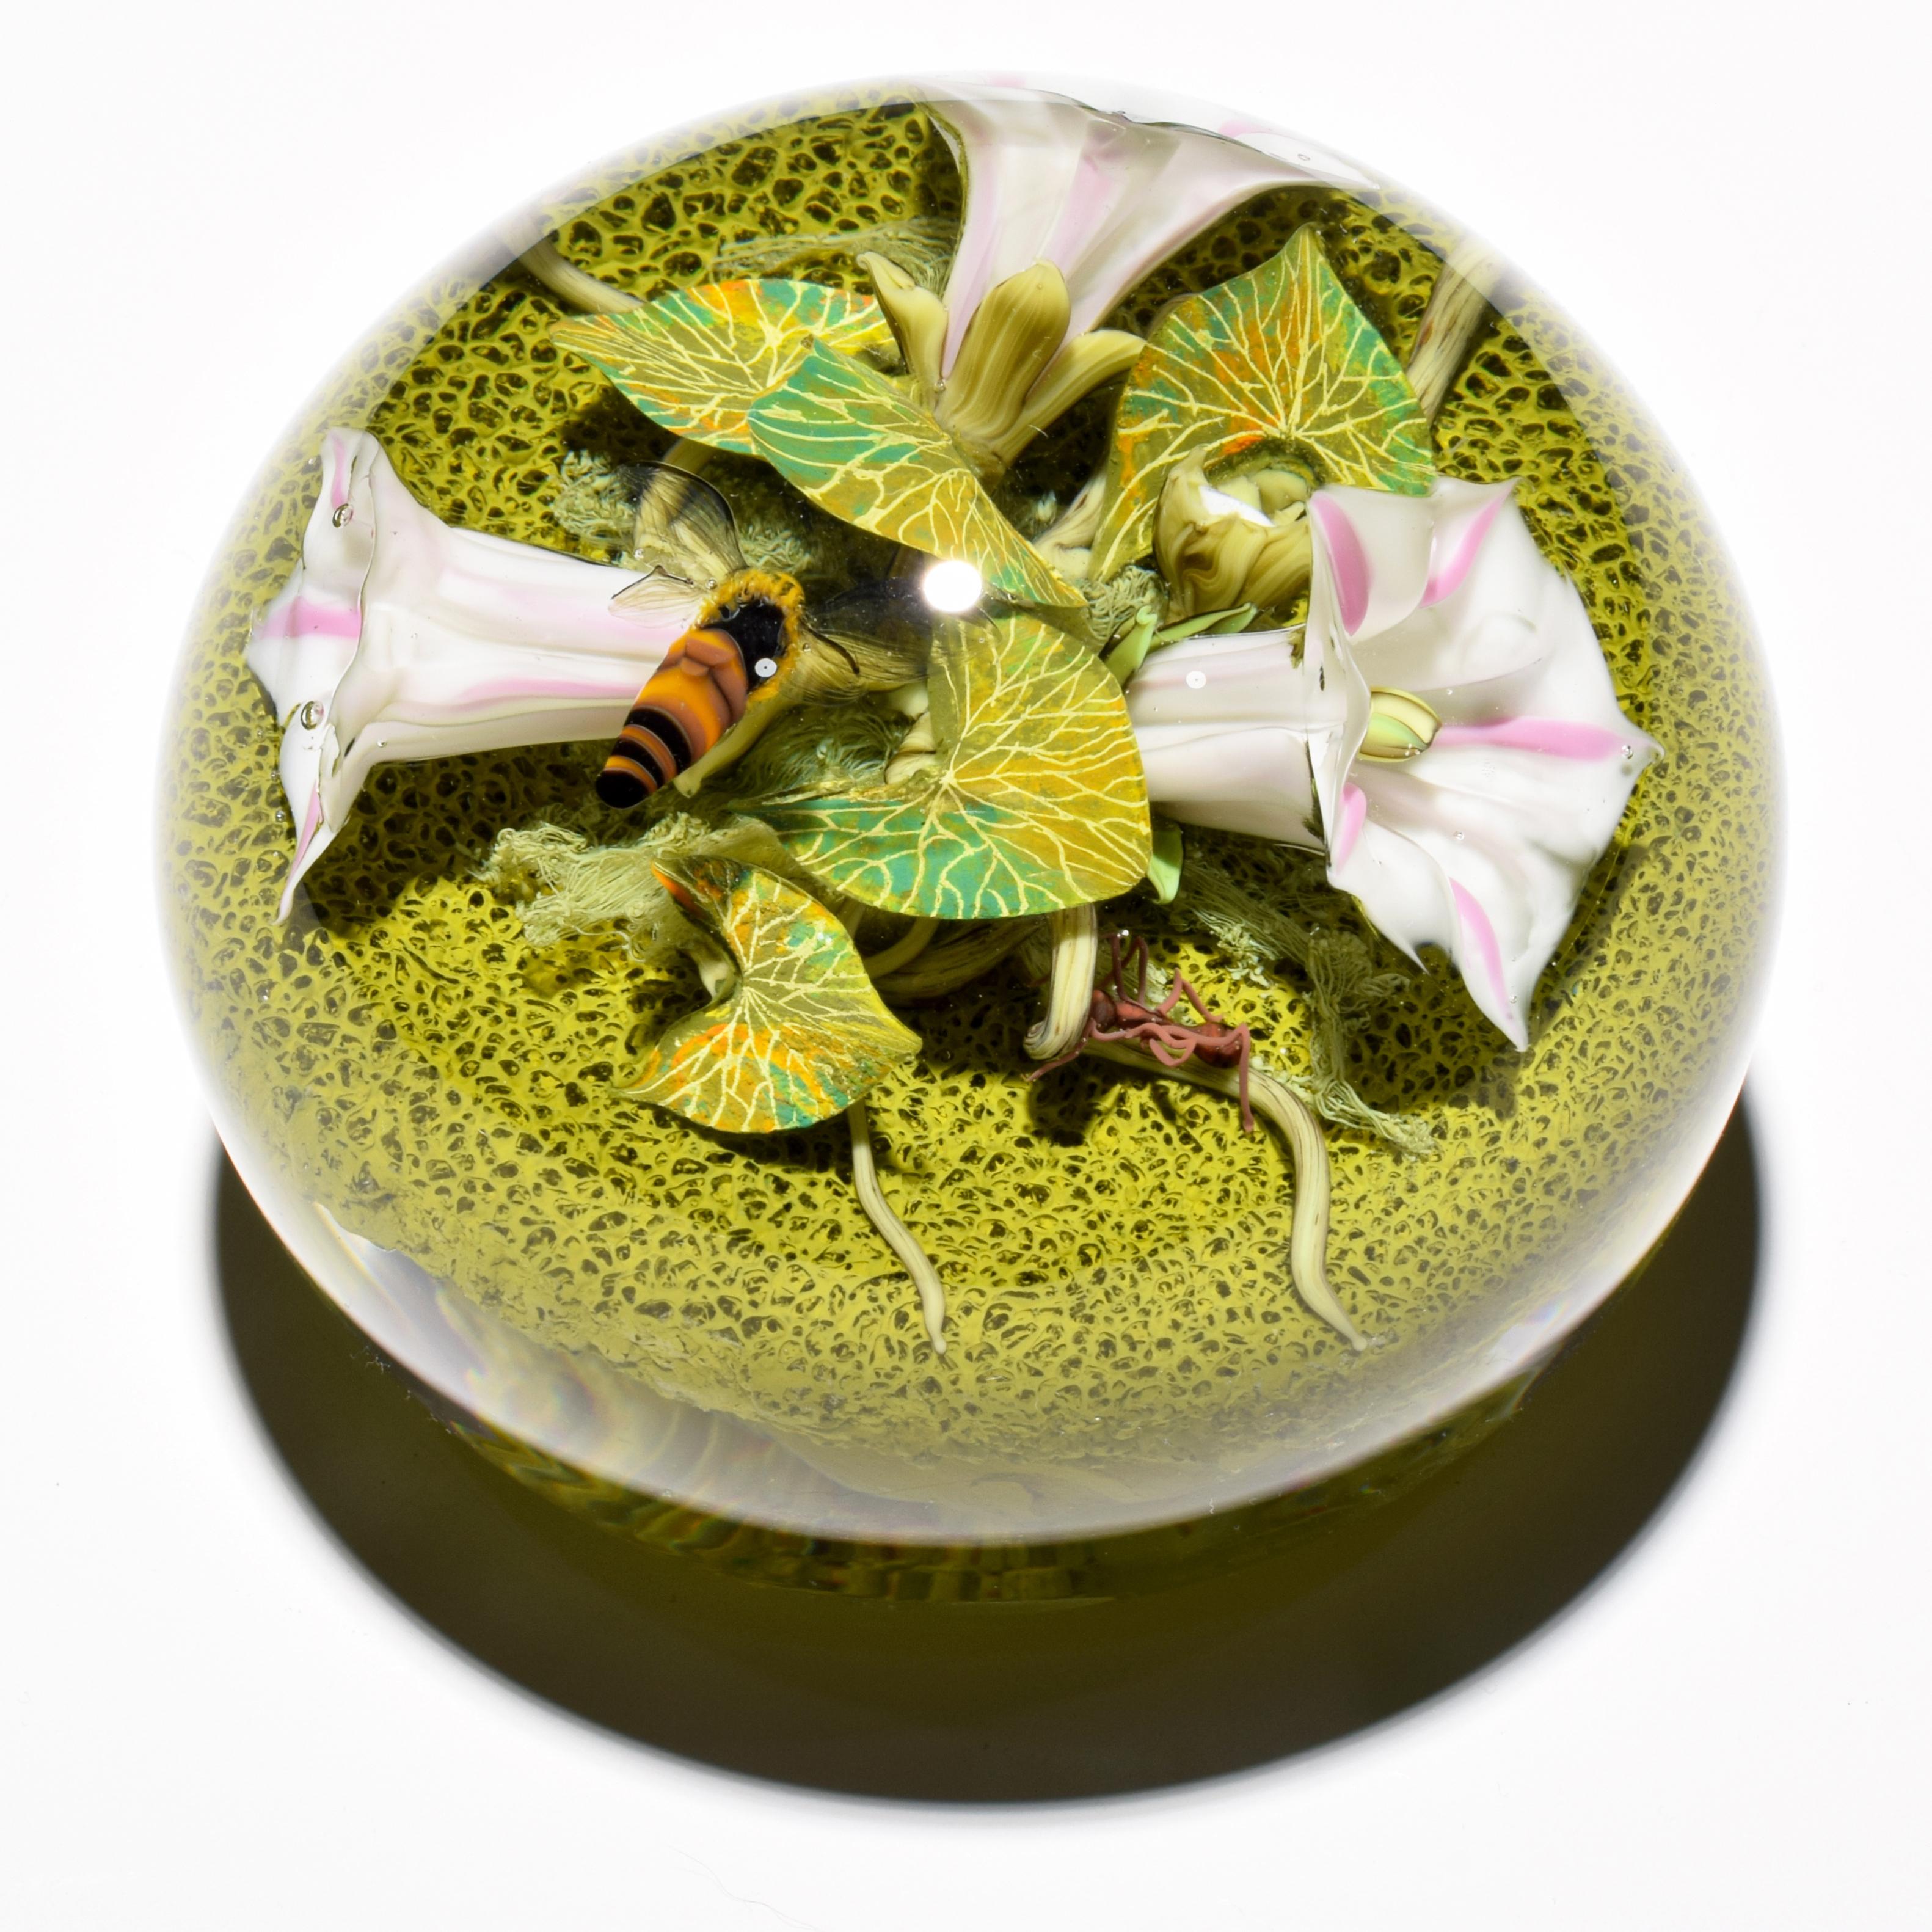 Paul J. Stankard Morning Glories, Bee & Masks Oblate Paperweight - Contemporary Art by Paul Stankard